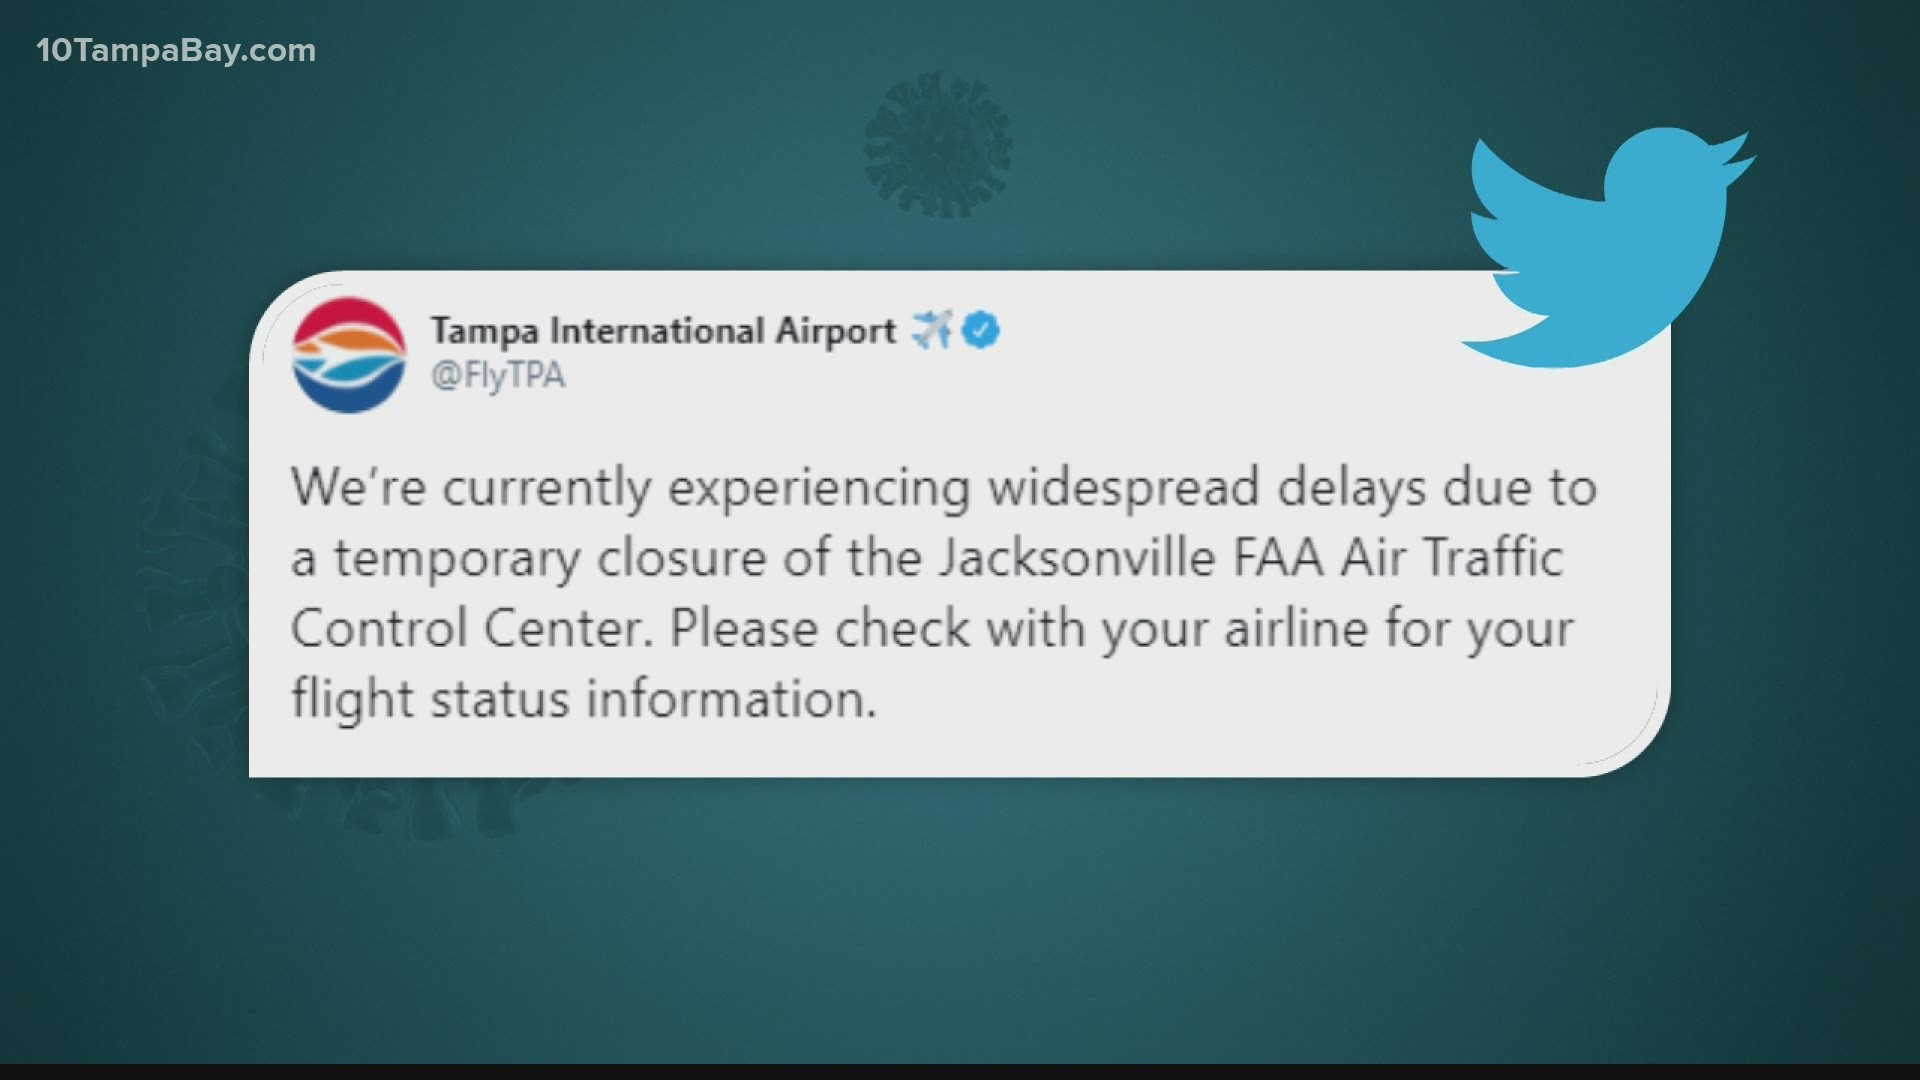 Check with your airline for the latest flight information.